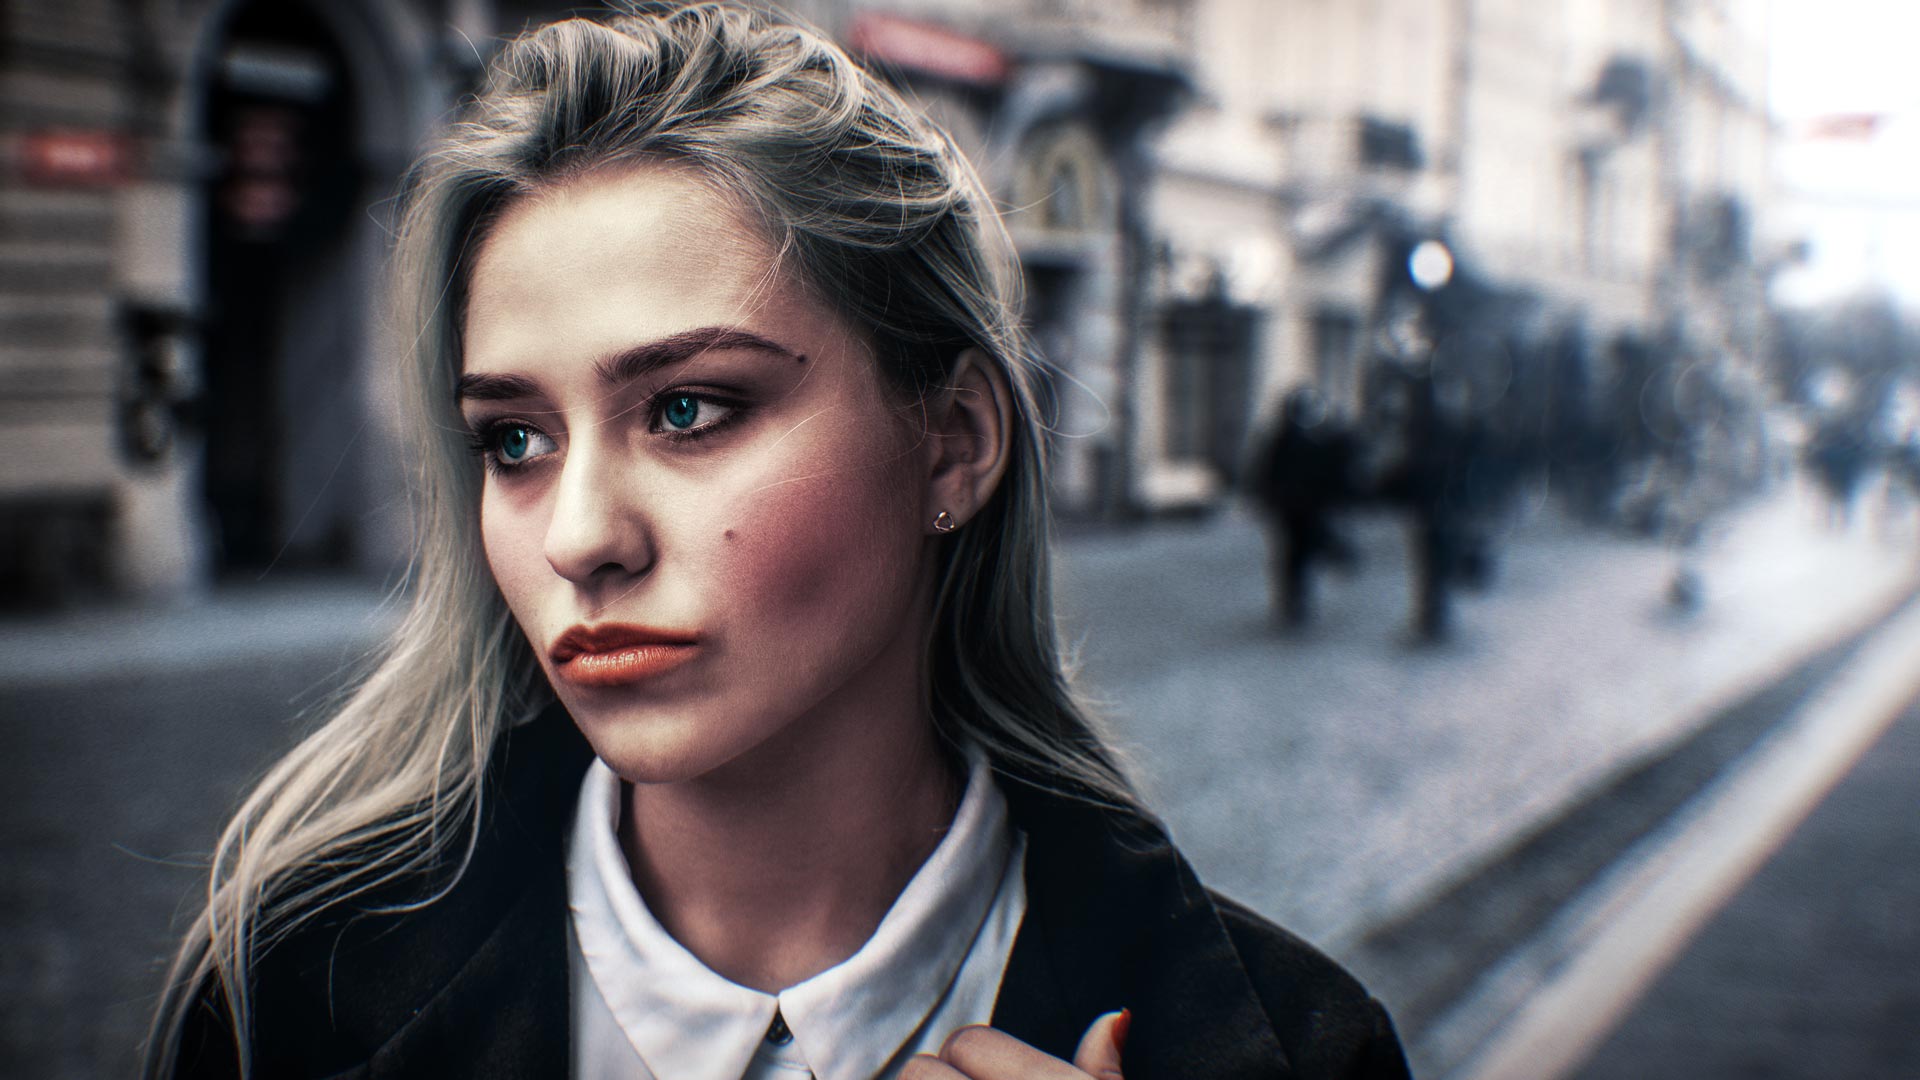 Colorized portrait of girl on street - Colorize after